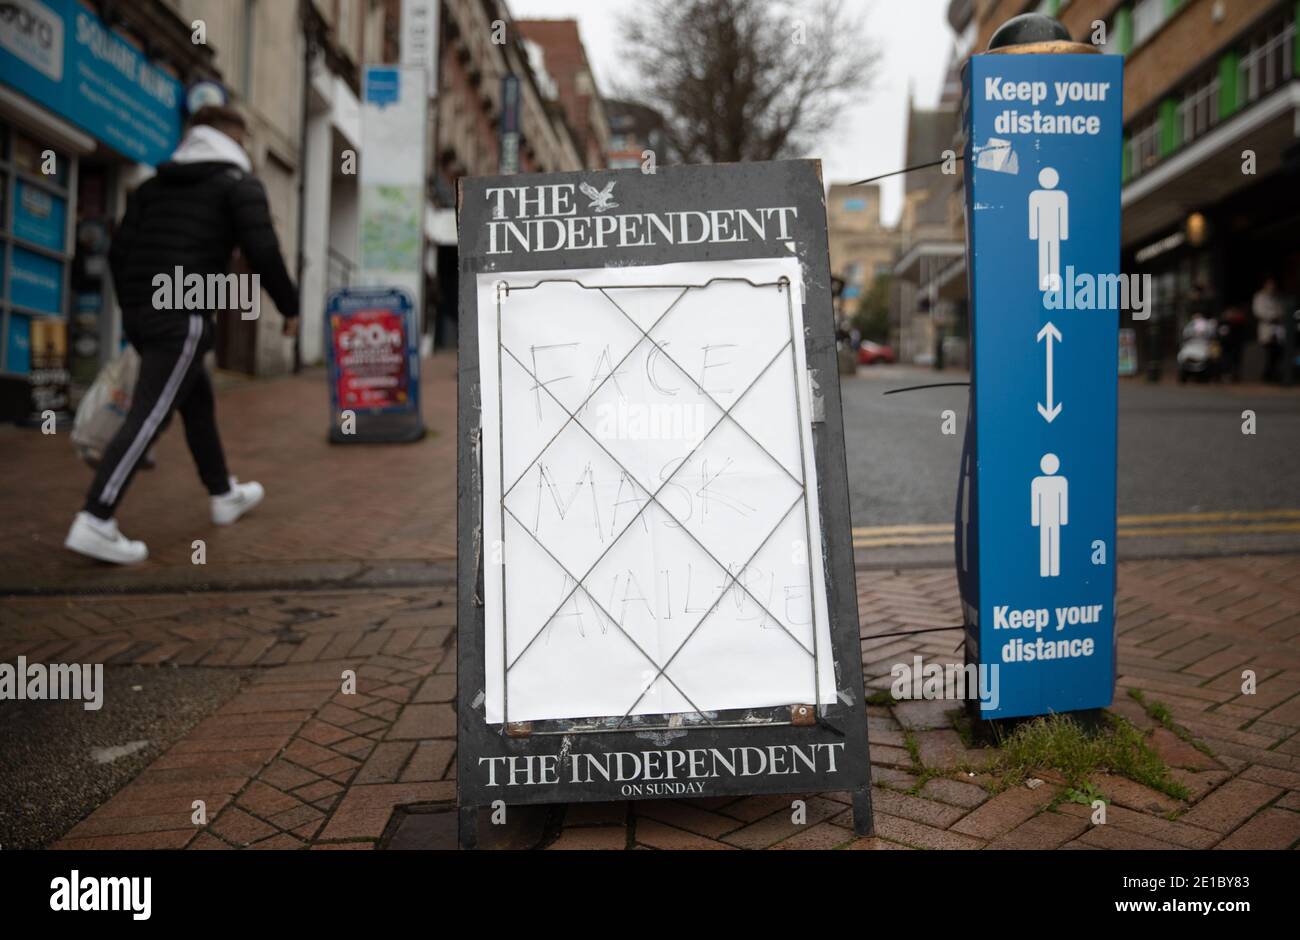 A person walks past a newsagents' sign advertising face masks available in Bournemouth, Dorset. Prime Minister Boris Johnson ordered a new national lockdown for England which means people will only be able to leave their homes for limited reasons, with measures expected to stay in place until mid-February. Stock Photo